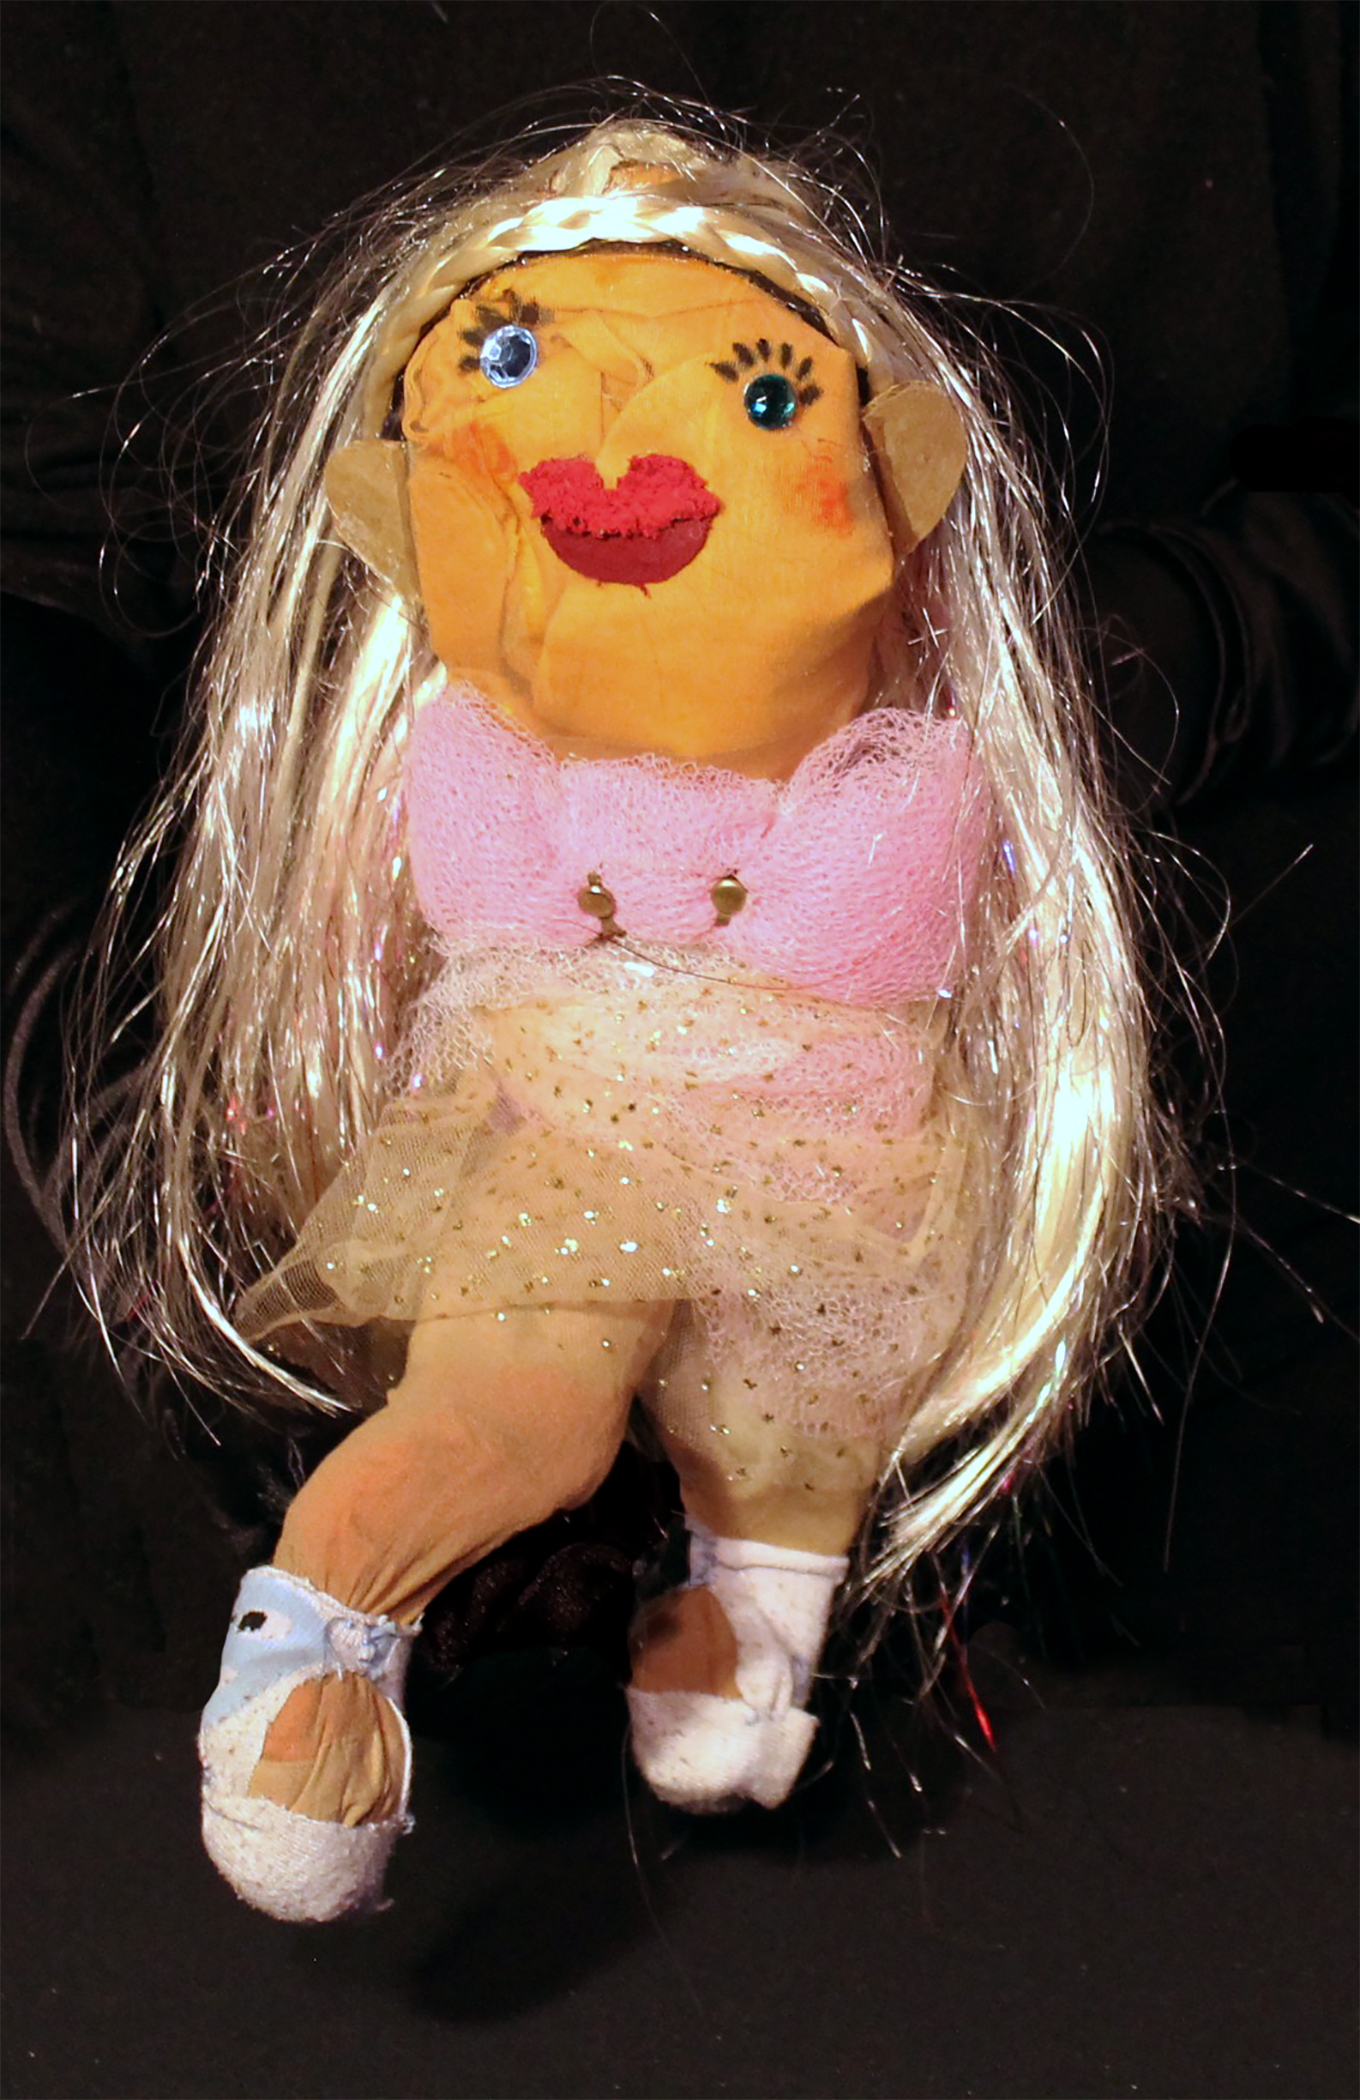 Kerry puppet from "My Other Half"